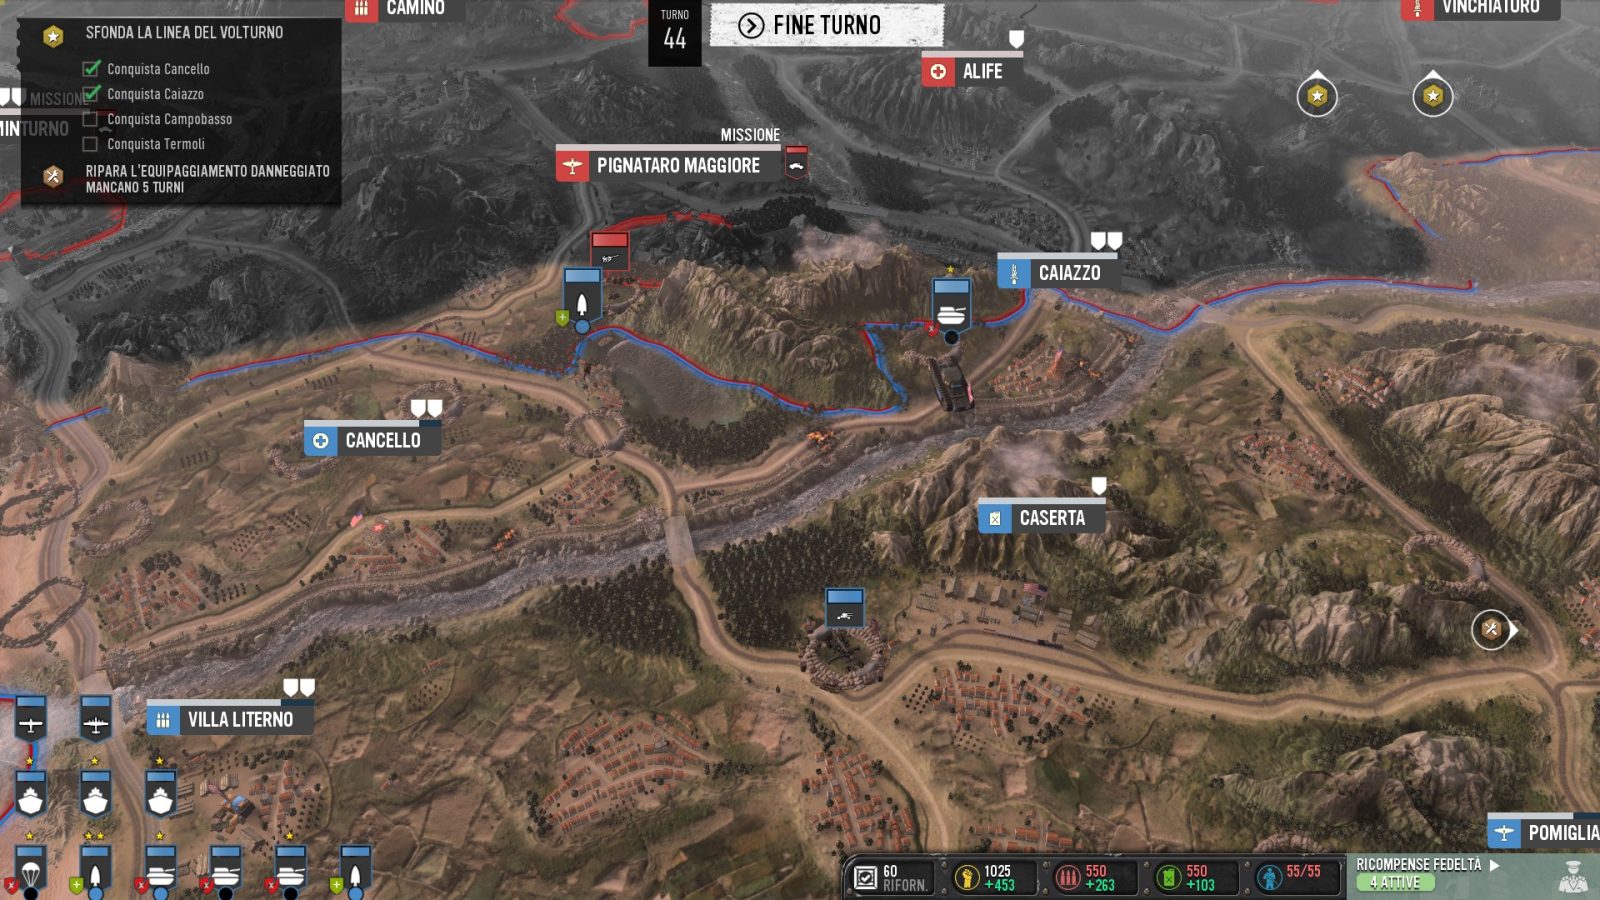 Company of Heroes 3 review: Let's dust off the tanks